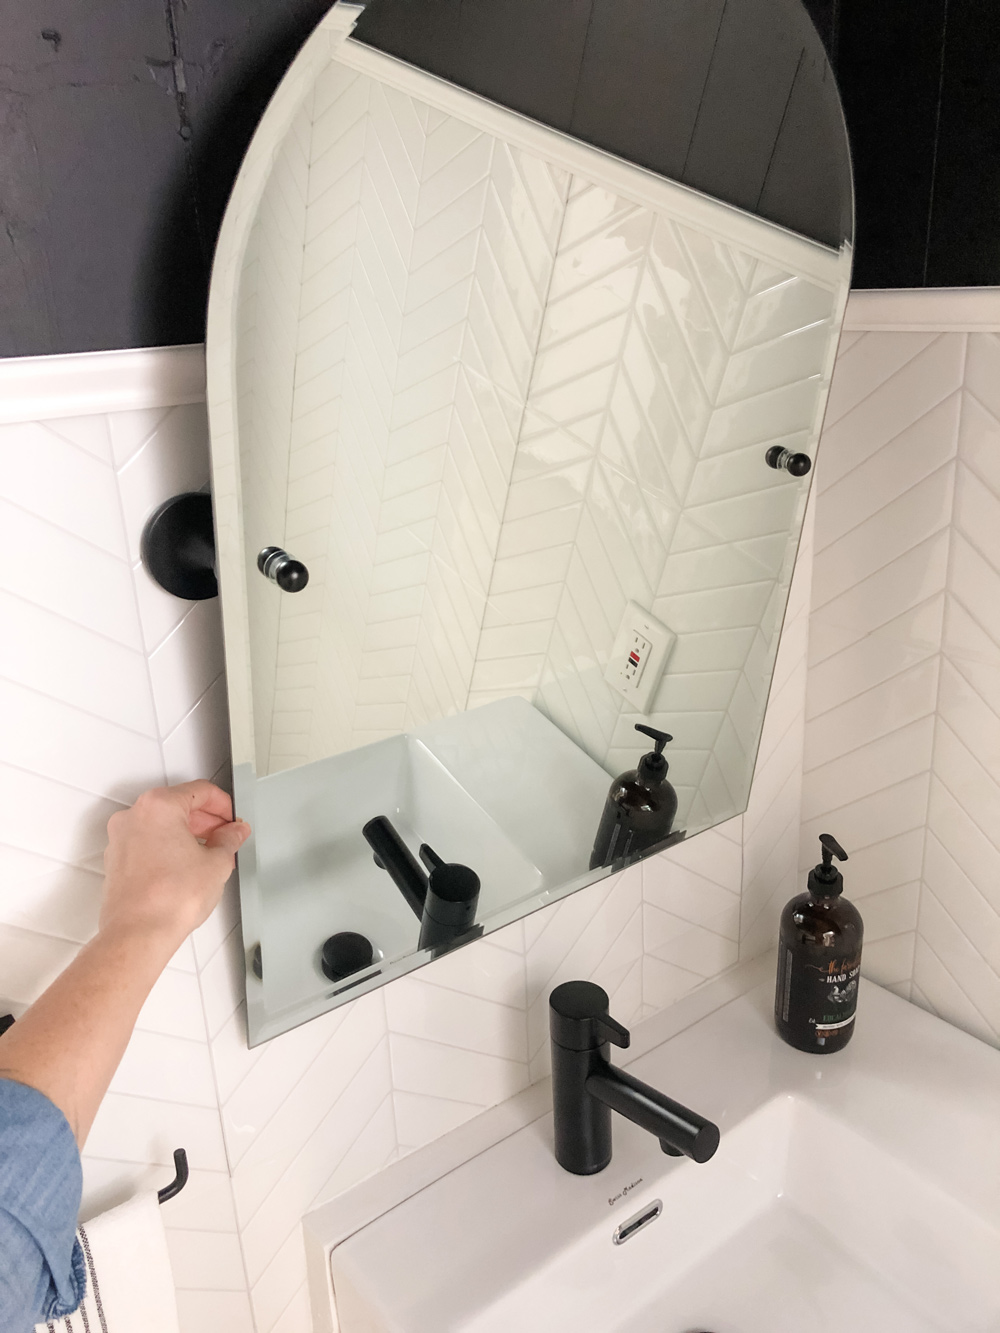 Hand touching tiltable mirror featured in bathroom.